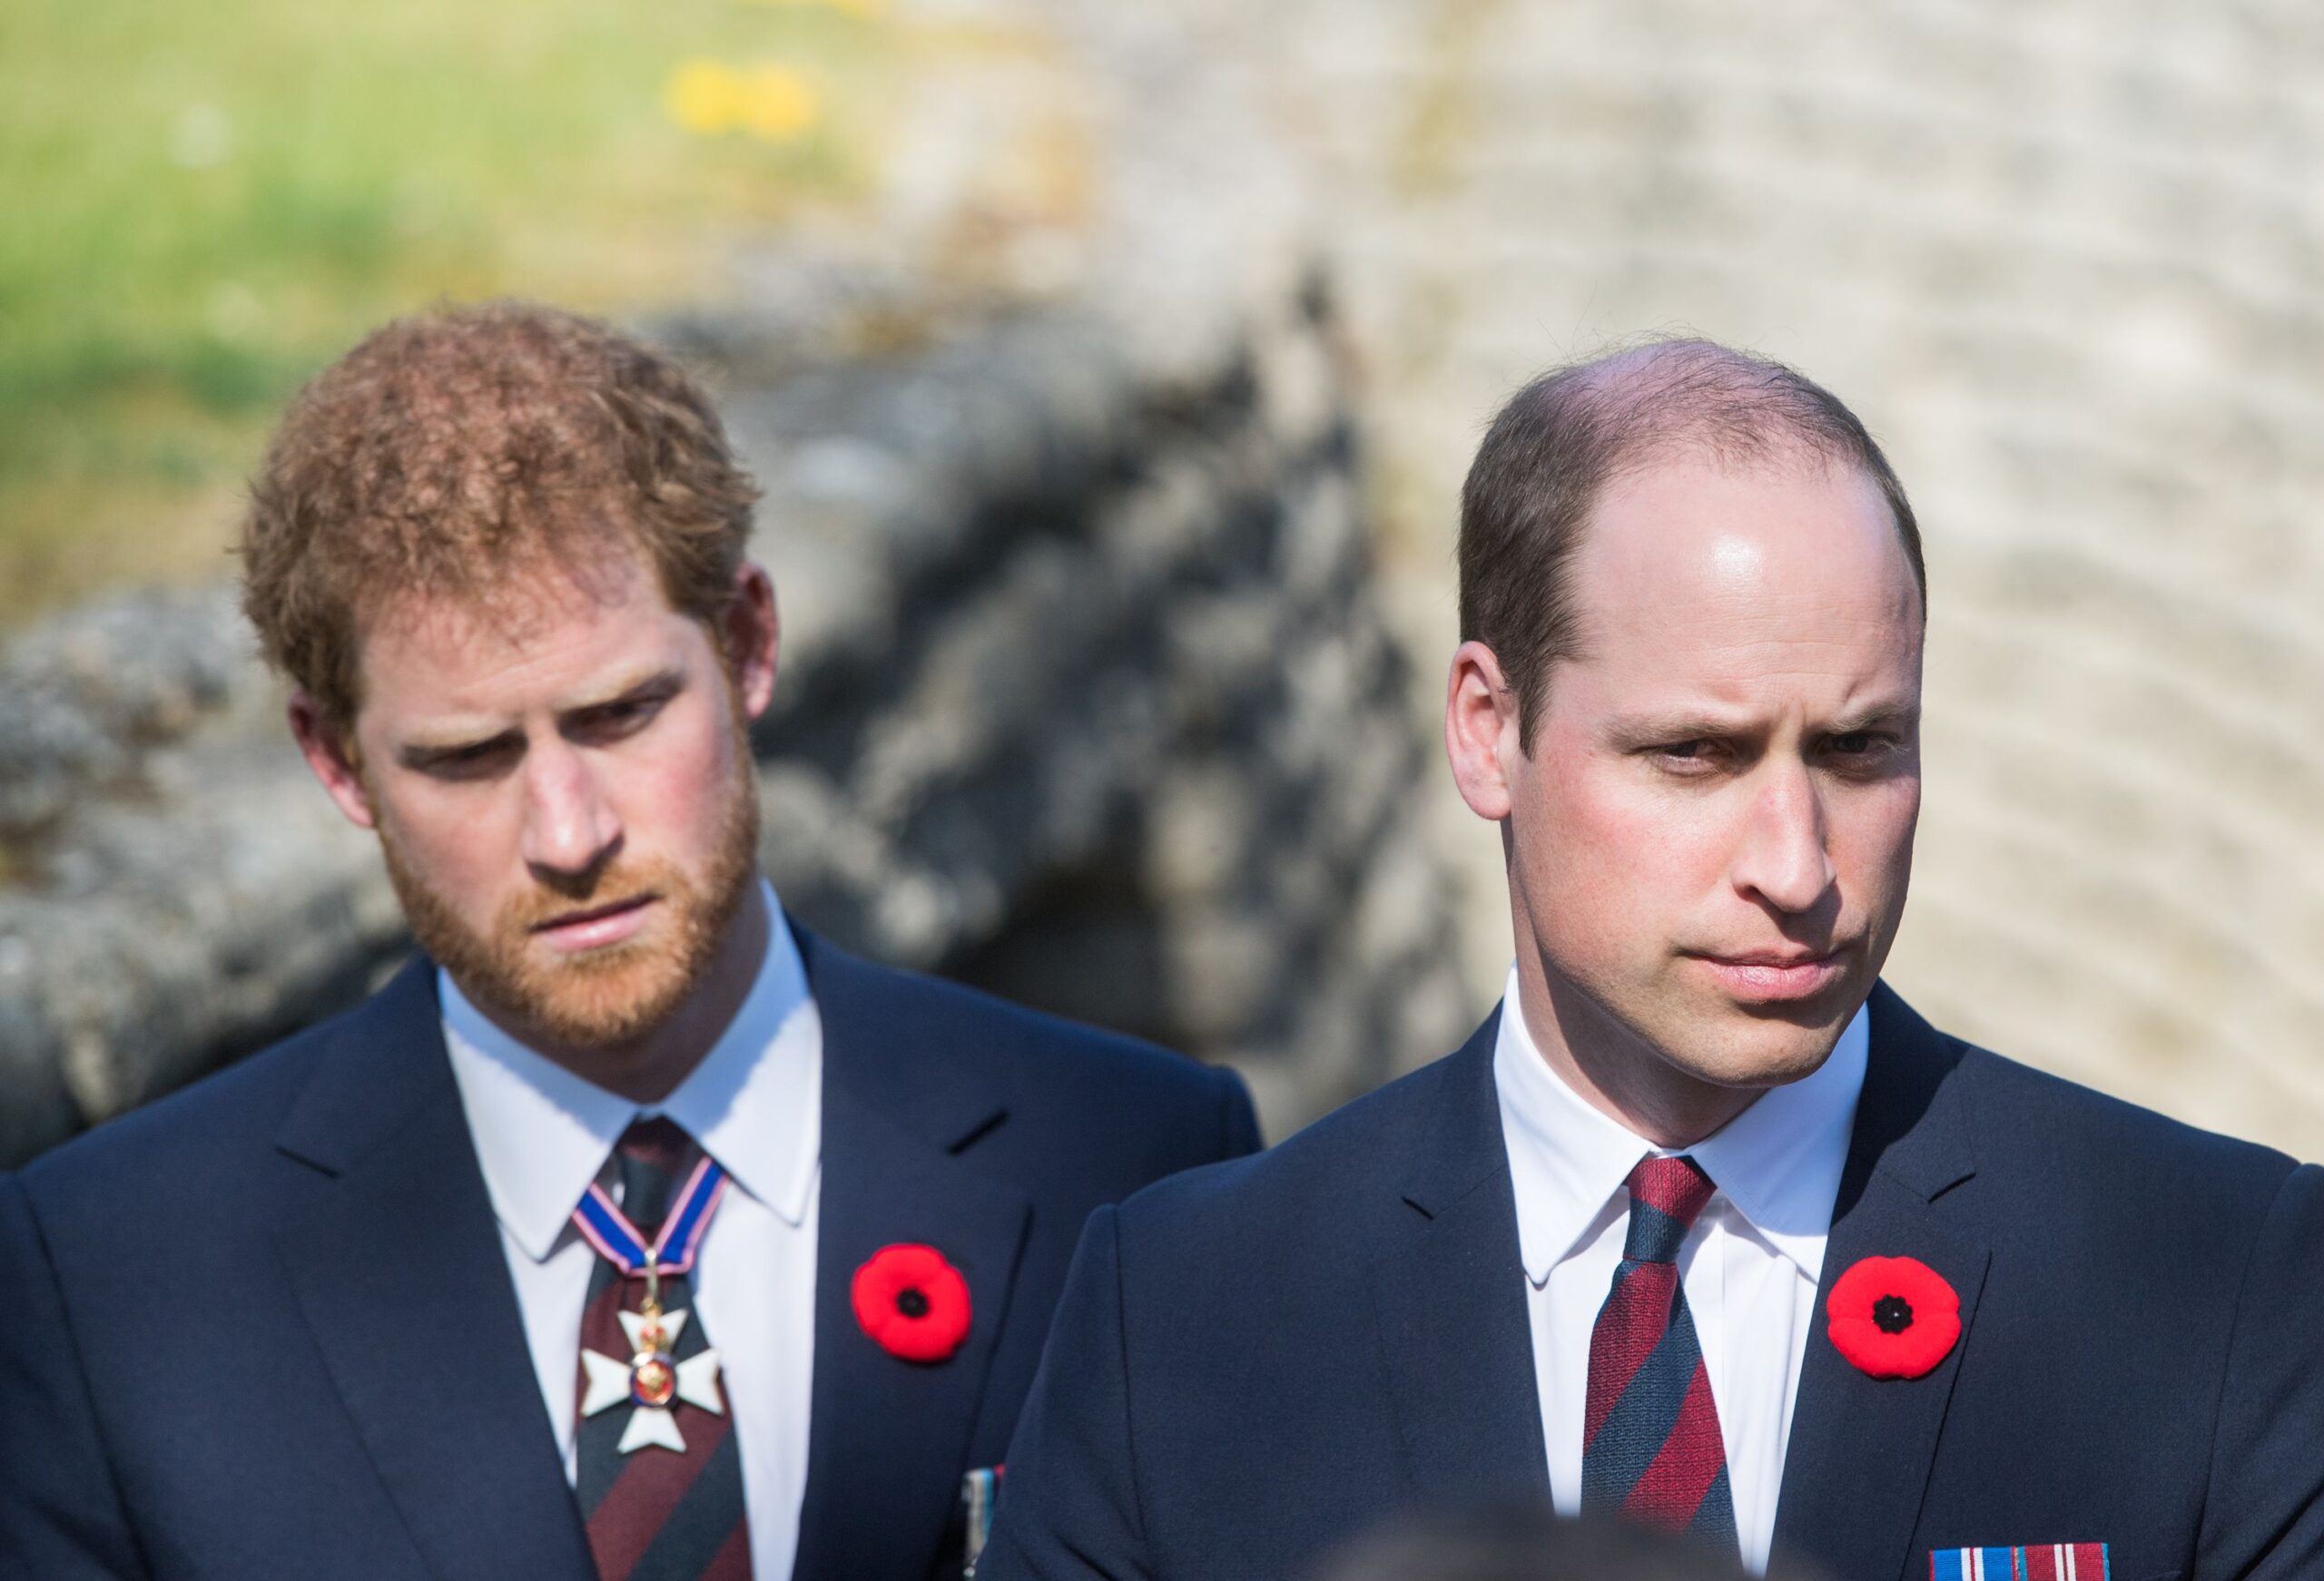 Prince William And Harry Fight: What Is The Dispute Between Them?